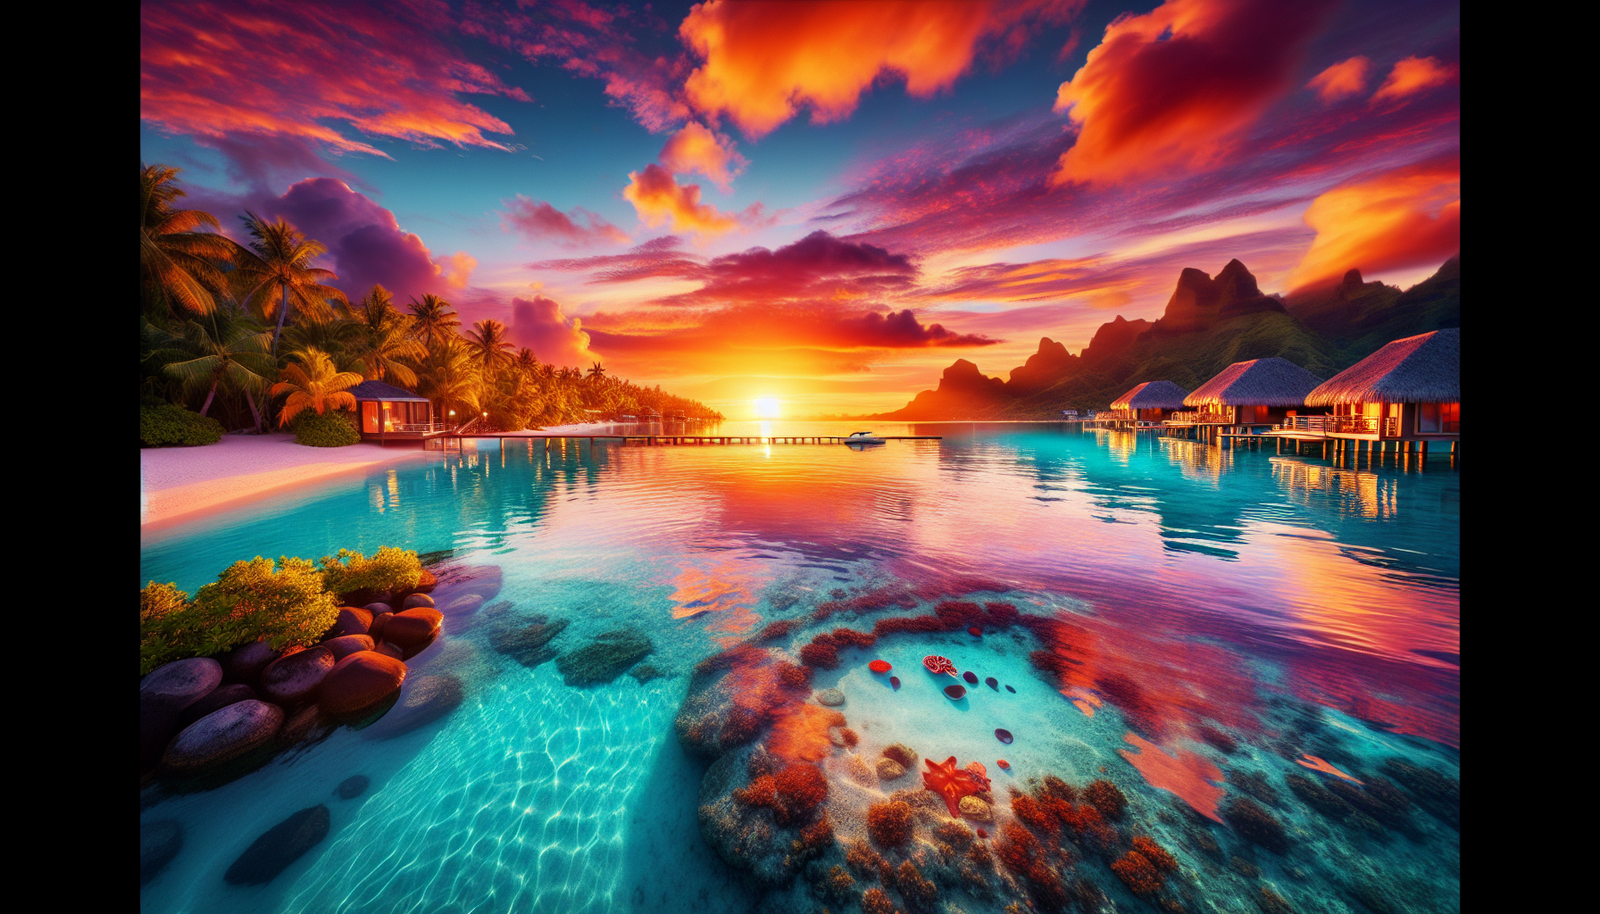 10 Tips For Booking Accommodations With Stunning Sunsets In Bora Bora